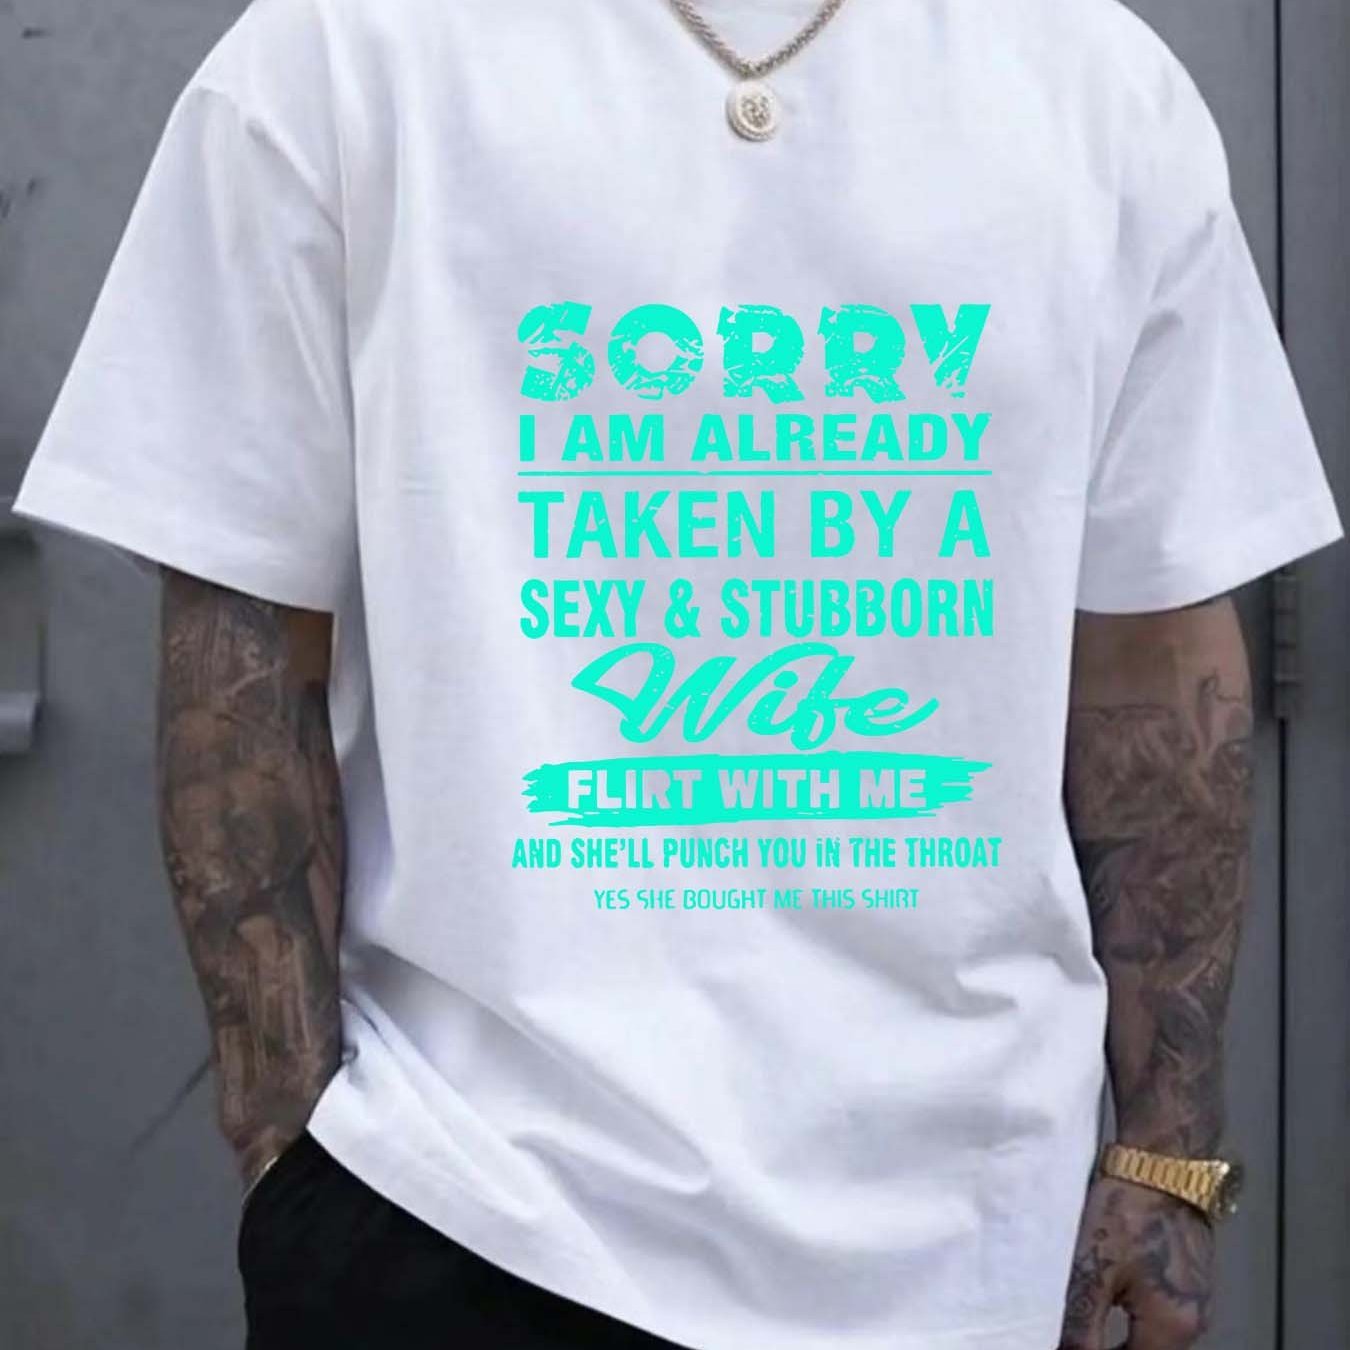 

Sorry I Am Already Taken By A Sexy & Stubborn Wife Print Men's Casual Sports T-shirt, Polyester Fiber, Round Neck, Breathable And Quick-drying